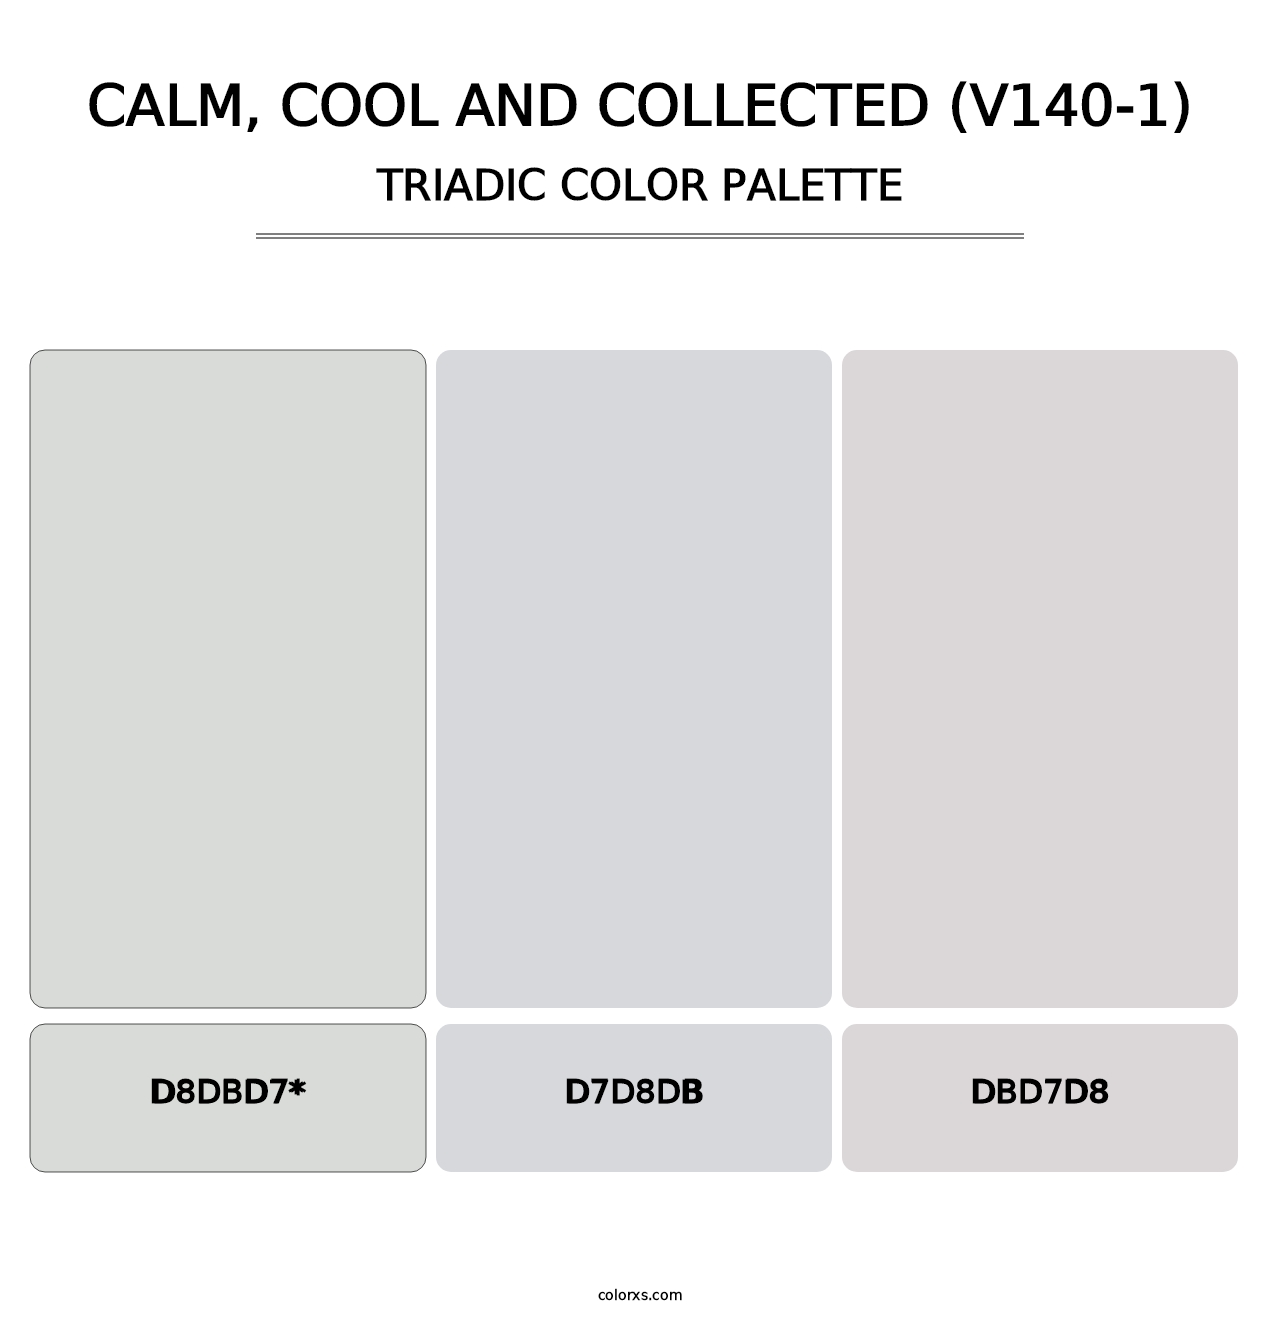 Calm, Cool and Collected (V140-1) - Triadic Color Palette